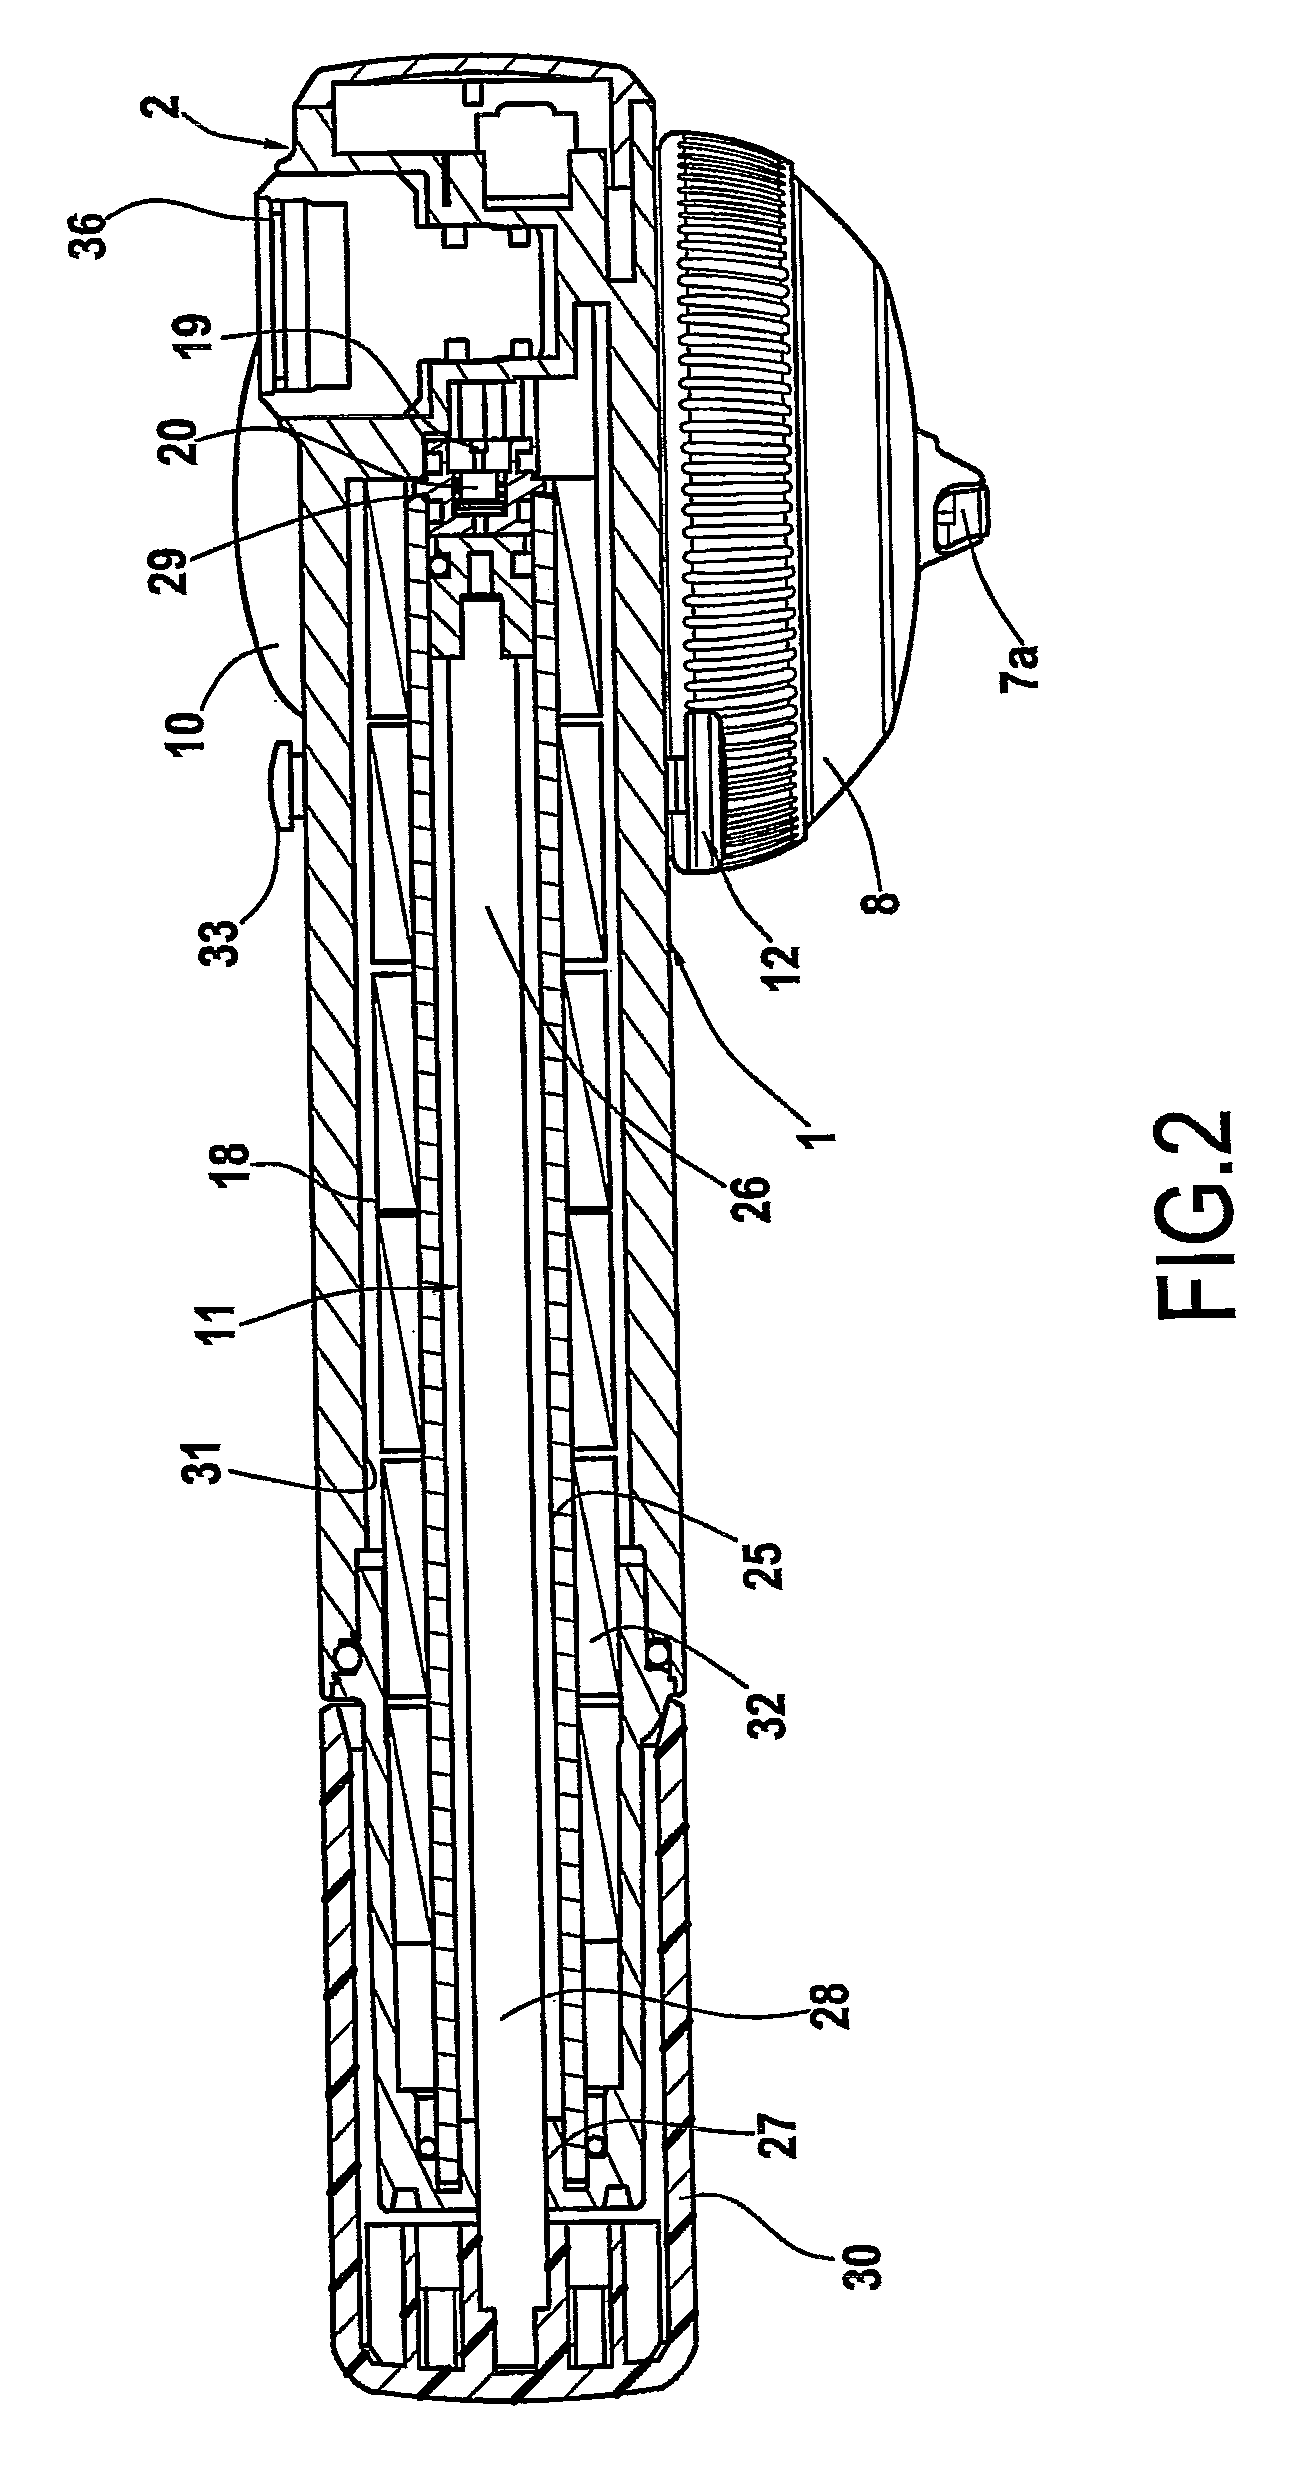 Apparatus for preparing an infusion